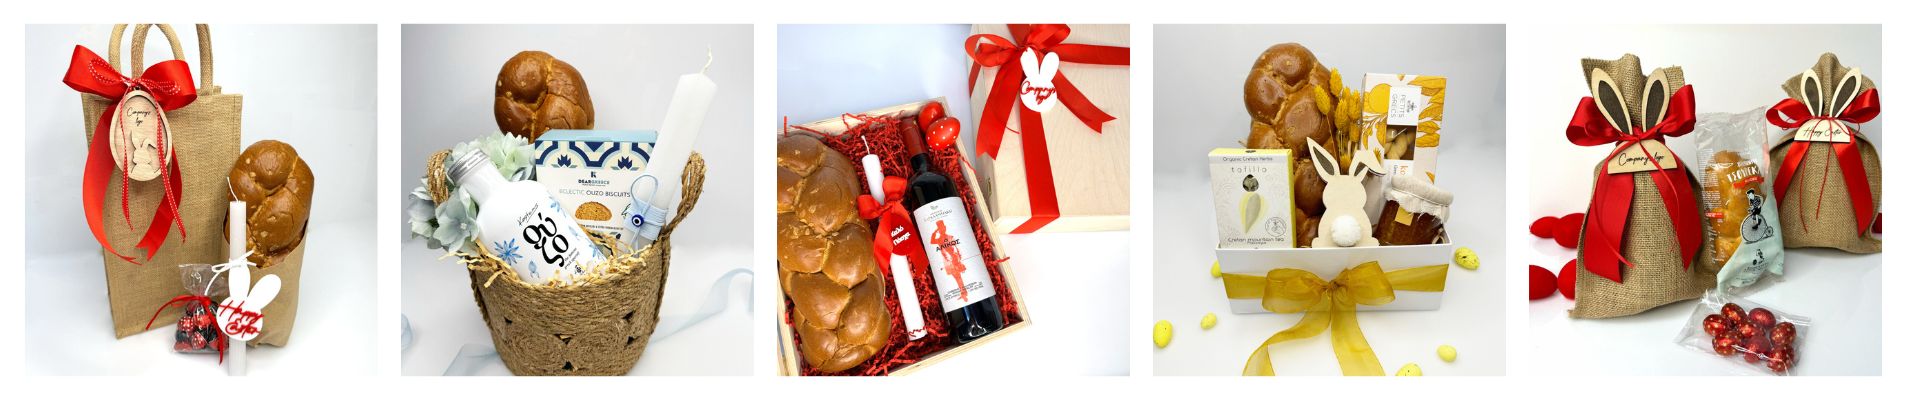 Corporate Gifts, Easter Gifts, Easter Gift Hampers, mycretangoods